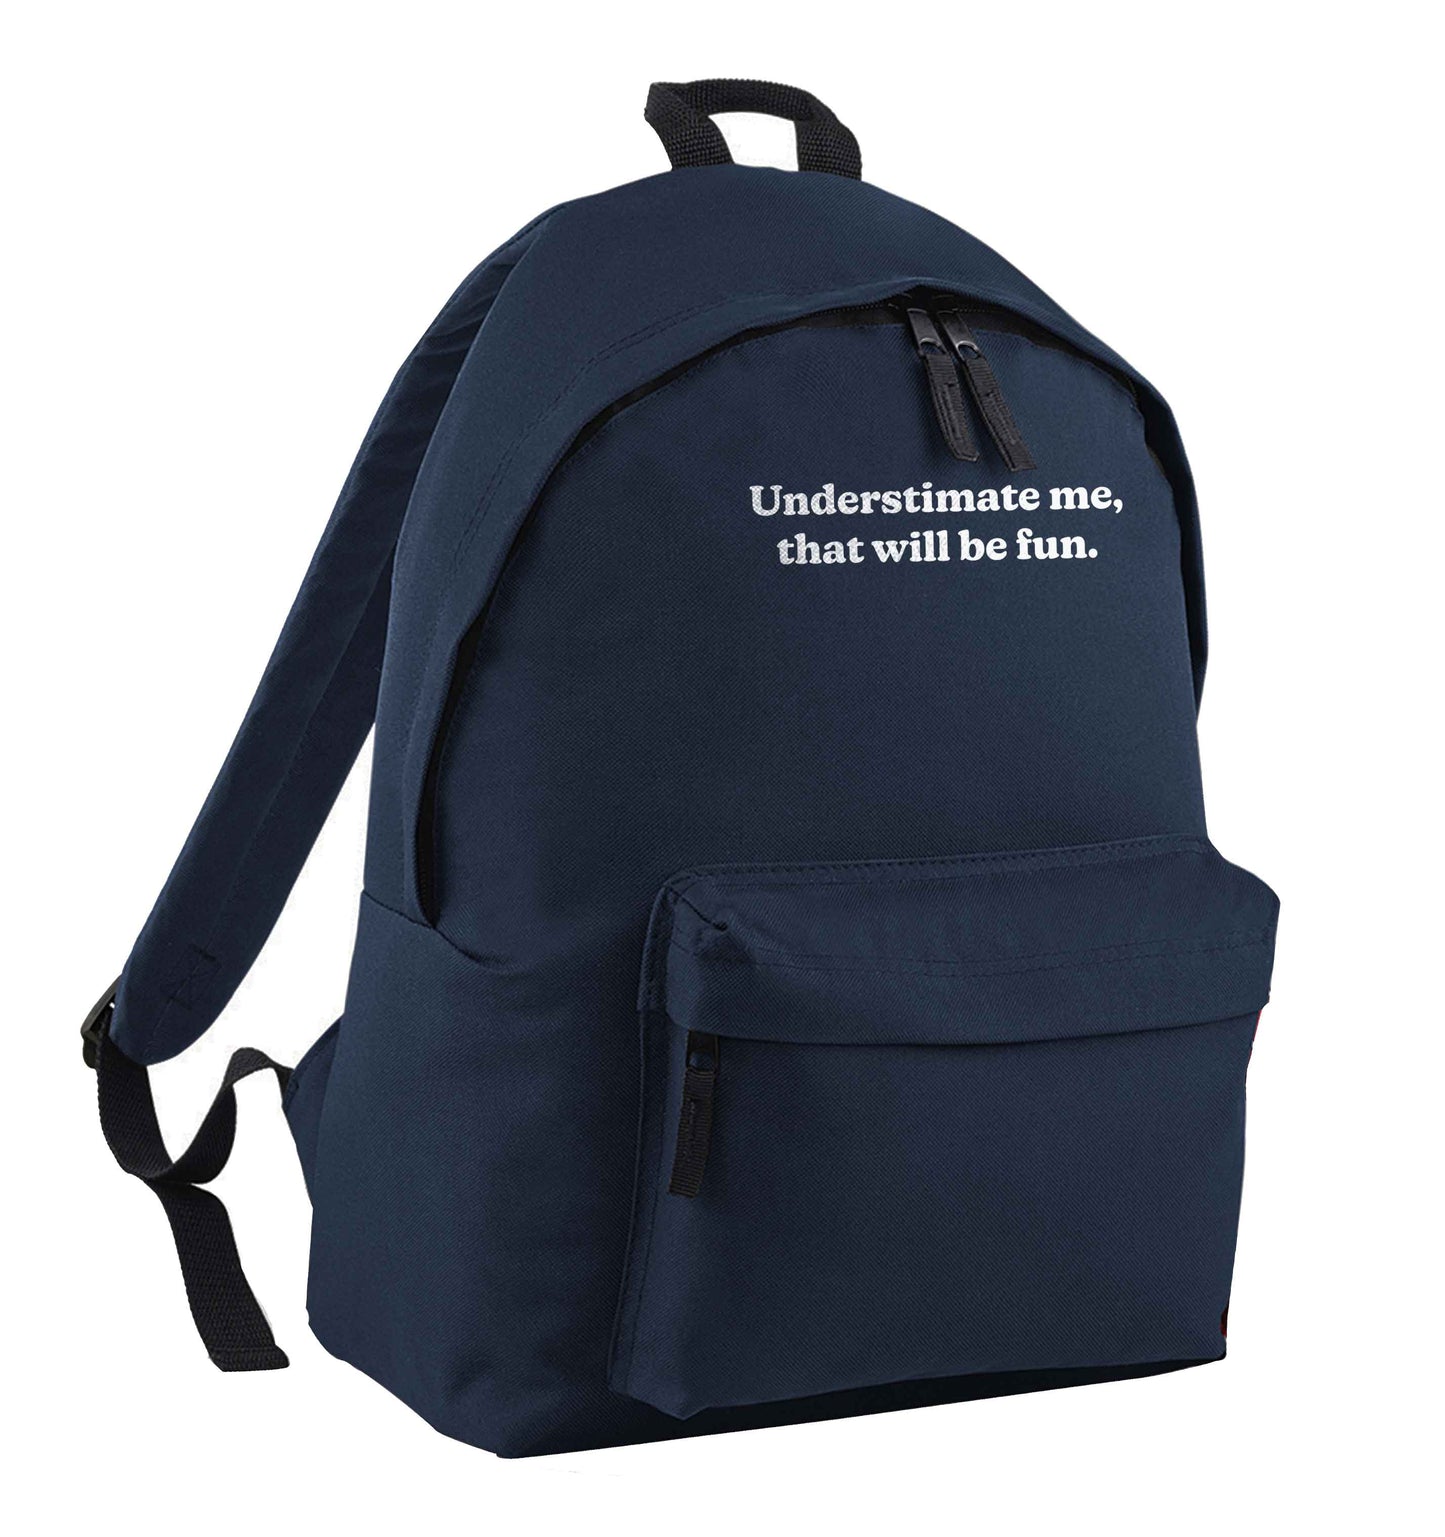 Underestimate me that will be fun navy children's backpack